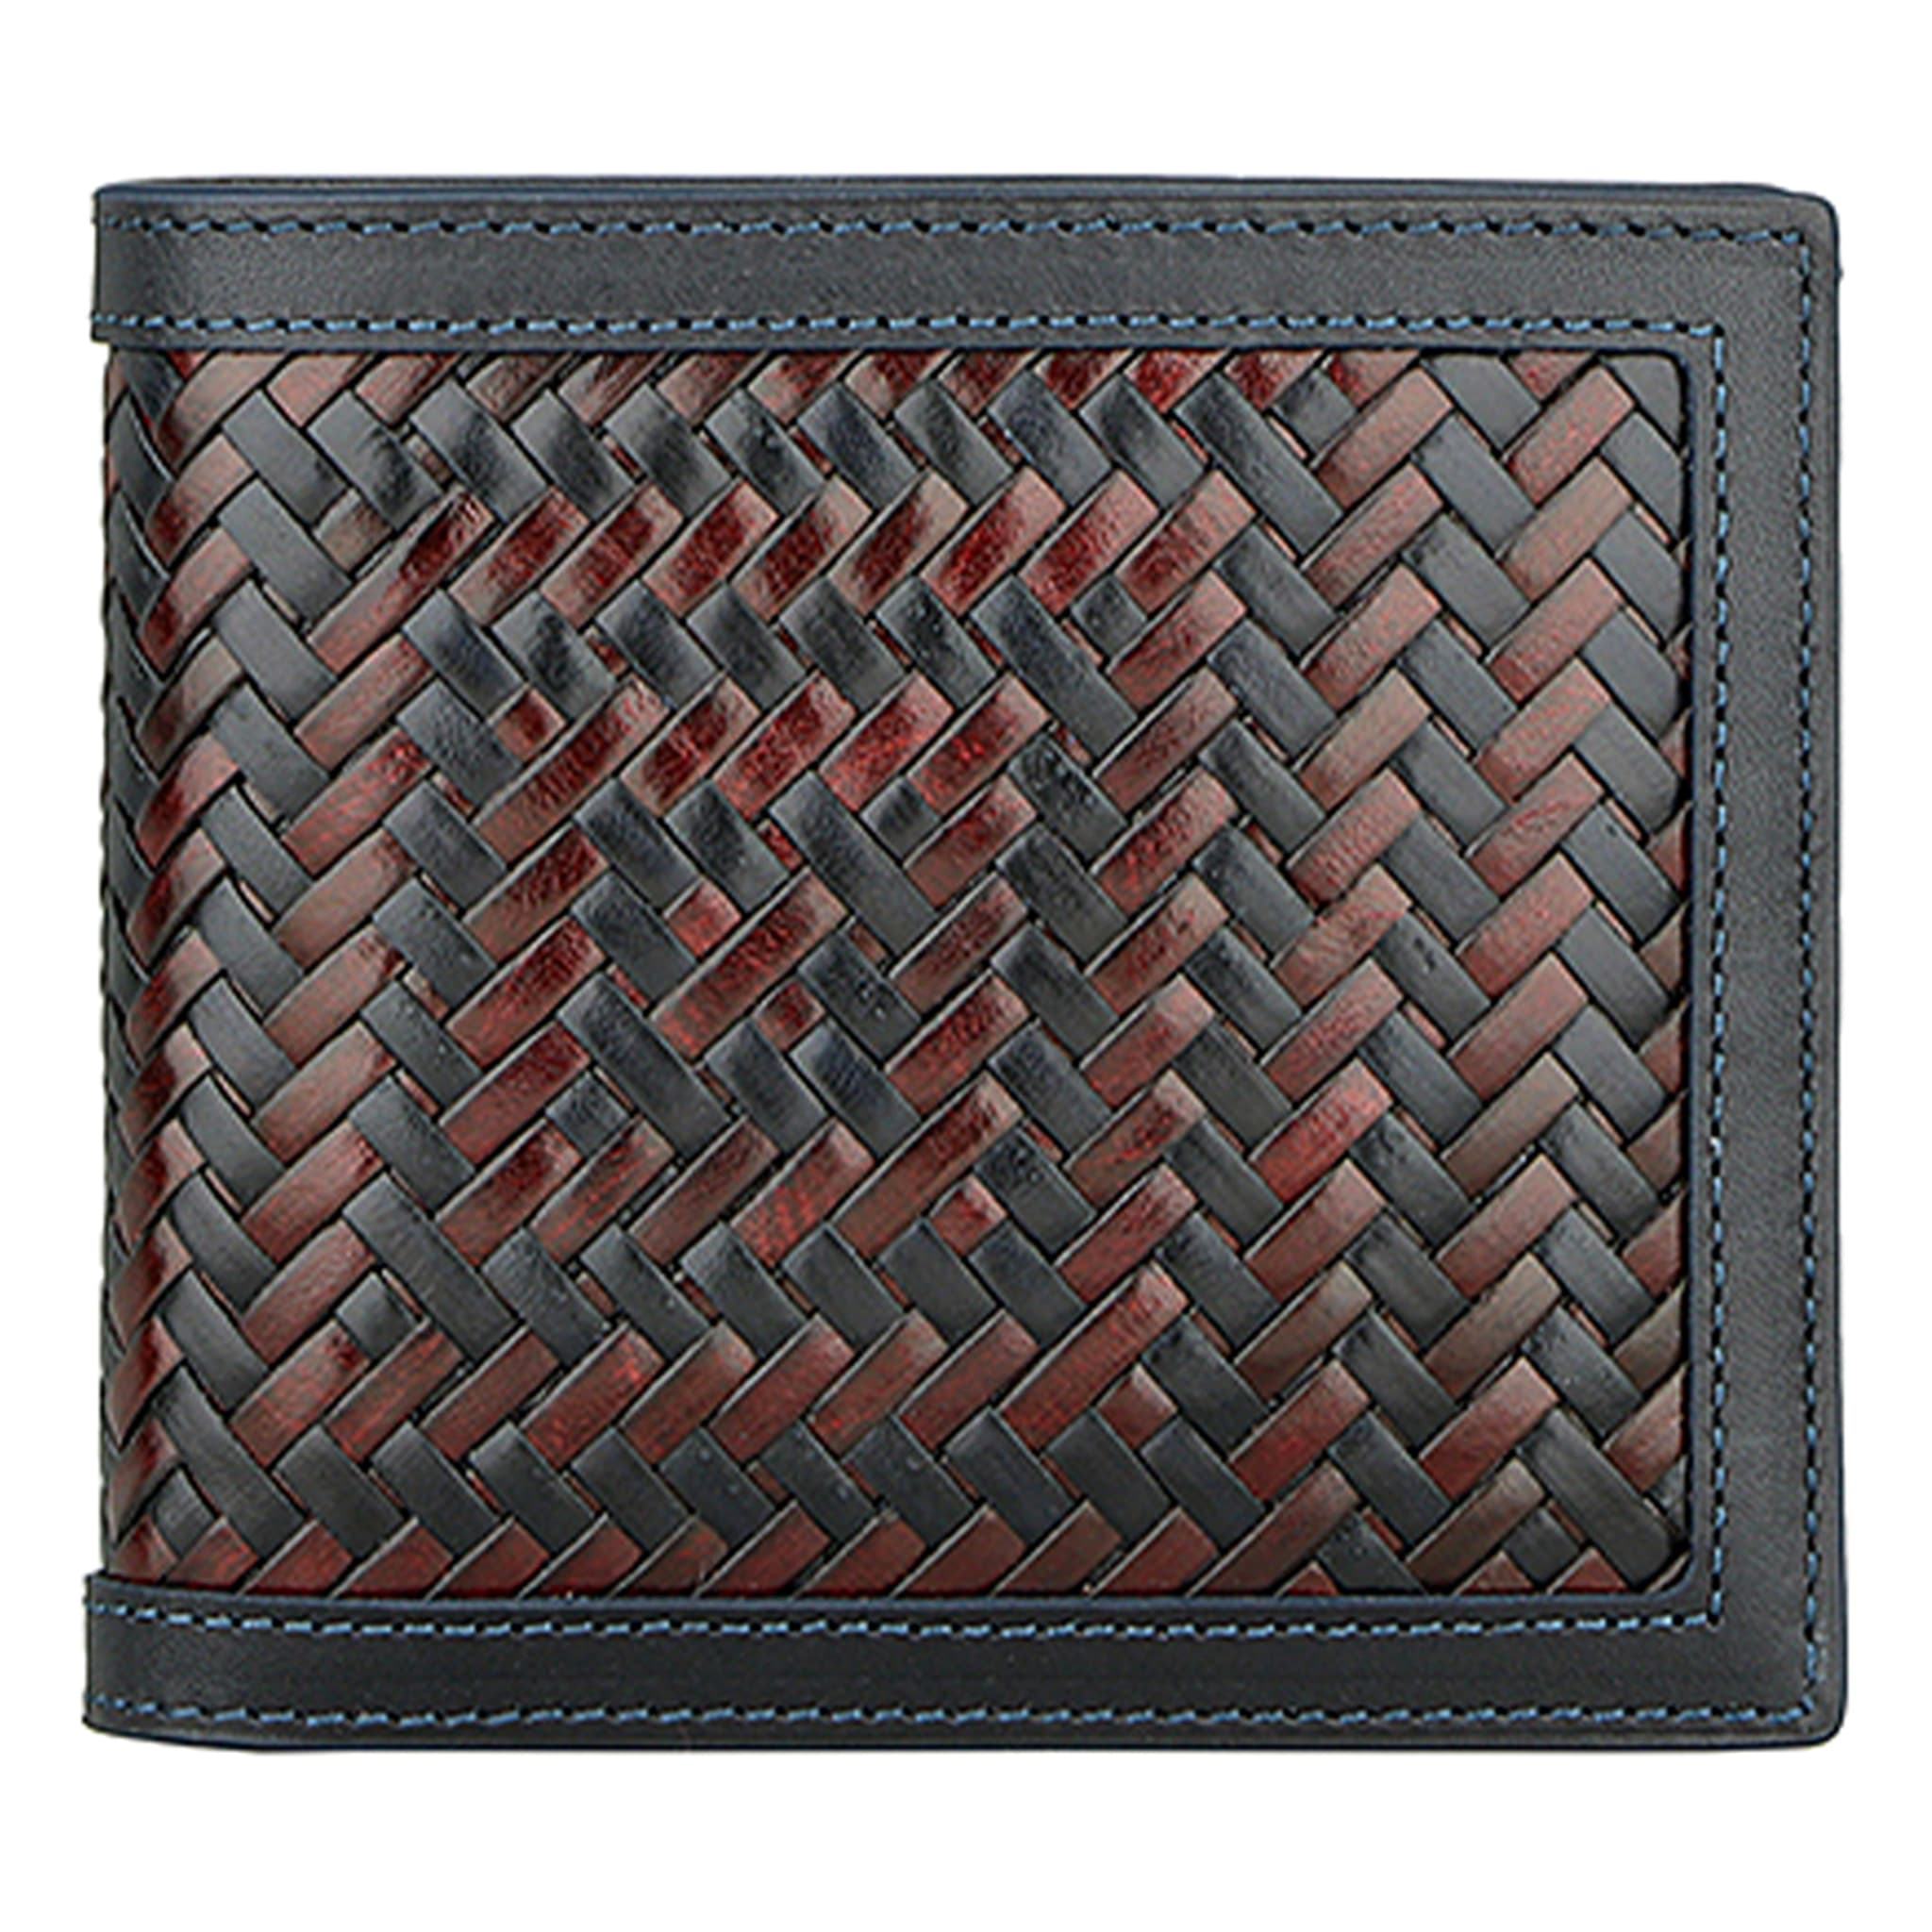 Braided Leather Brown Wallet  - Main view